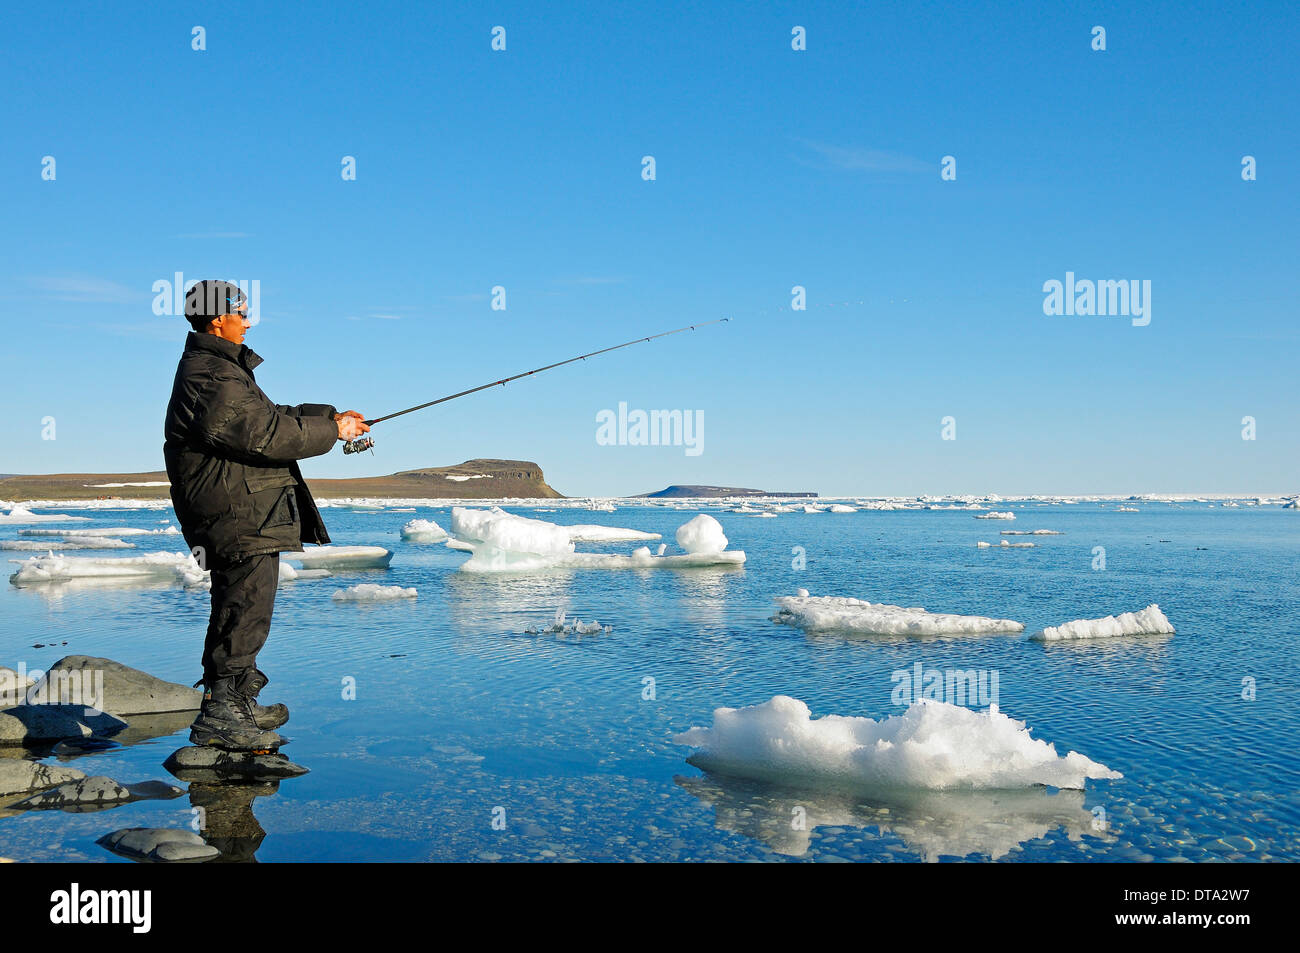 Man of the Inuit people fishing on the banks of the Beaufort Sea, Arctic Ocean, Victoria Island, formerly Holman Island Stock Photo